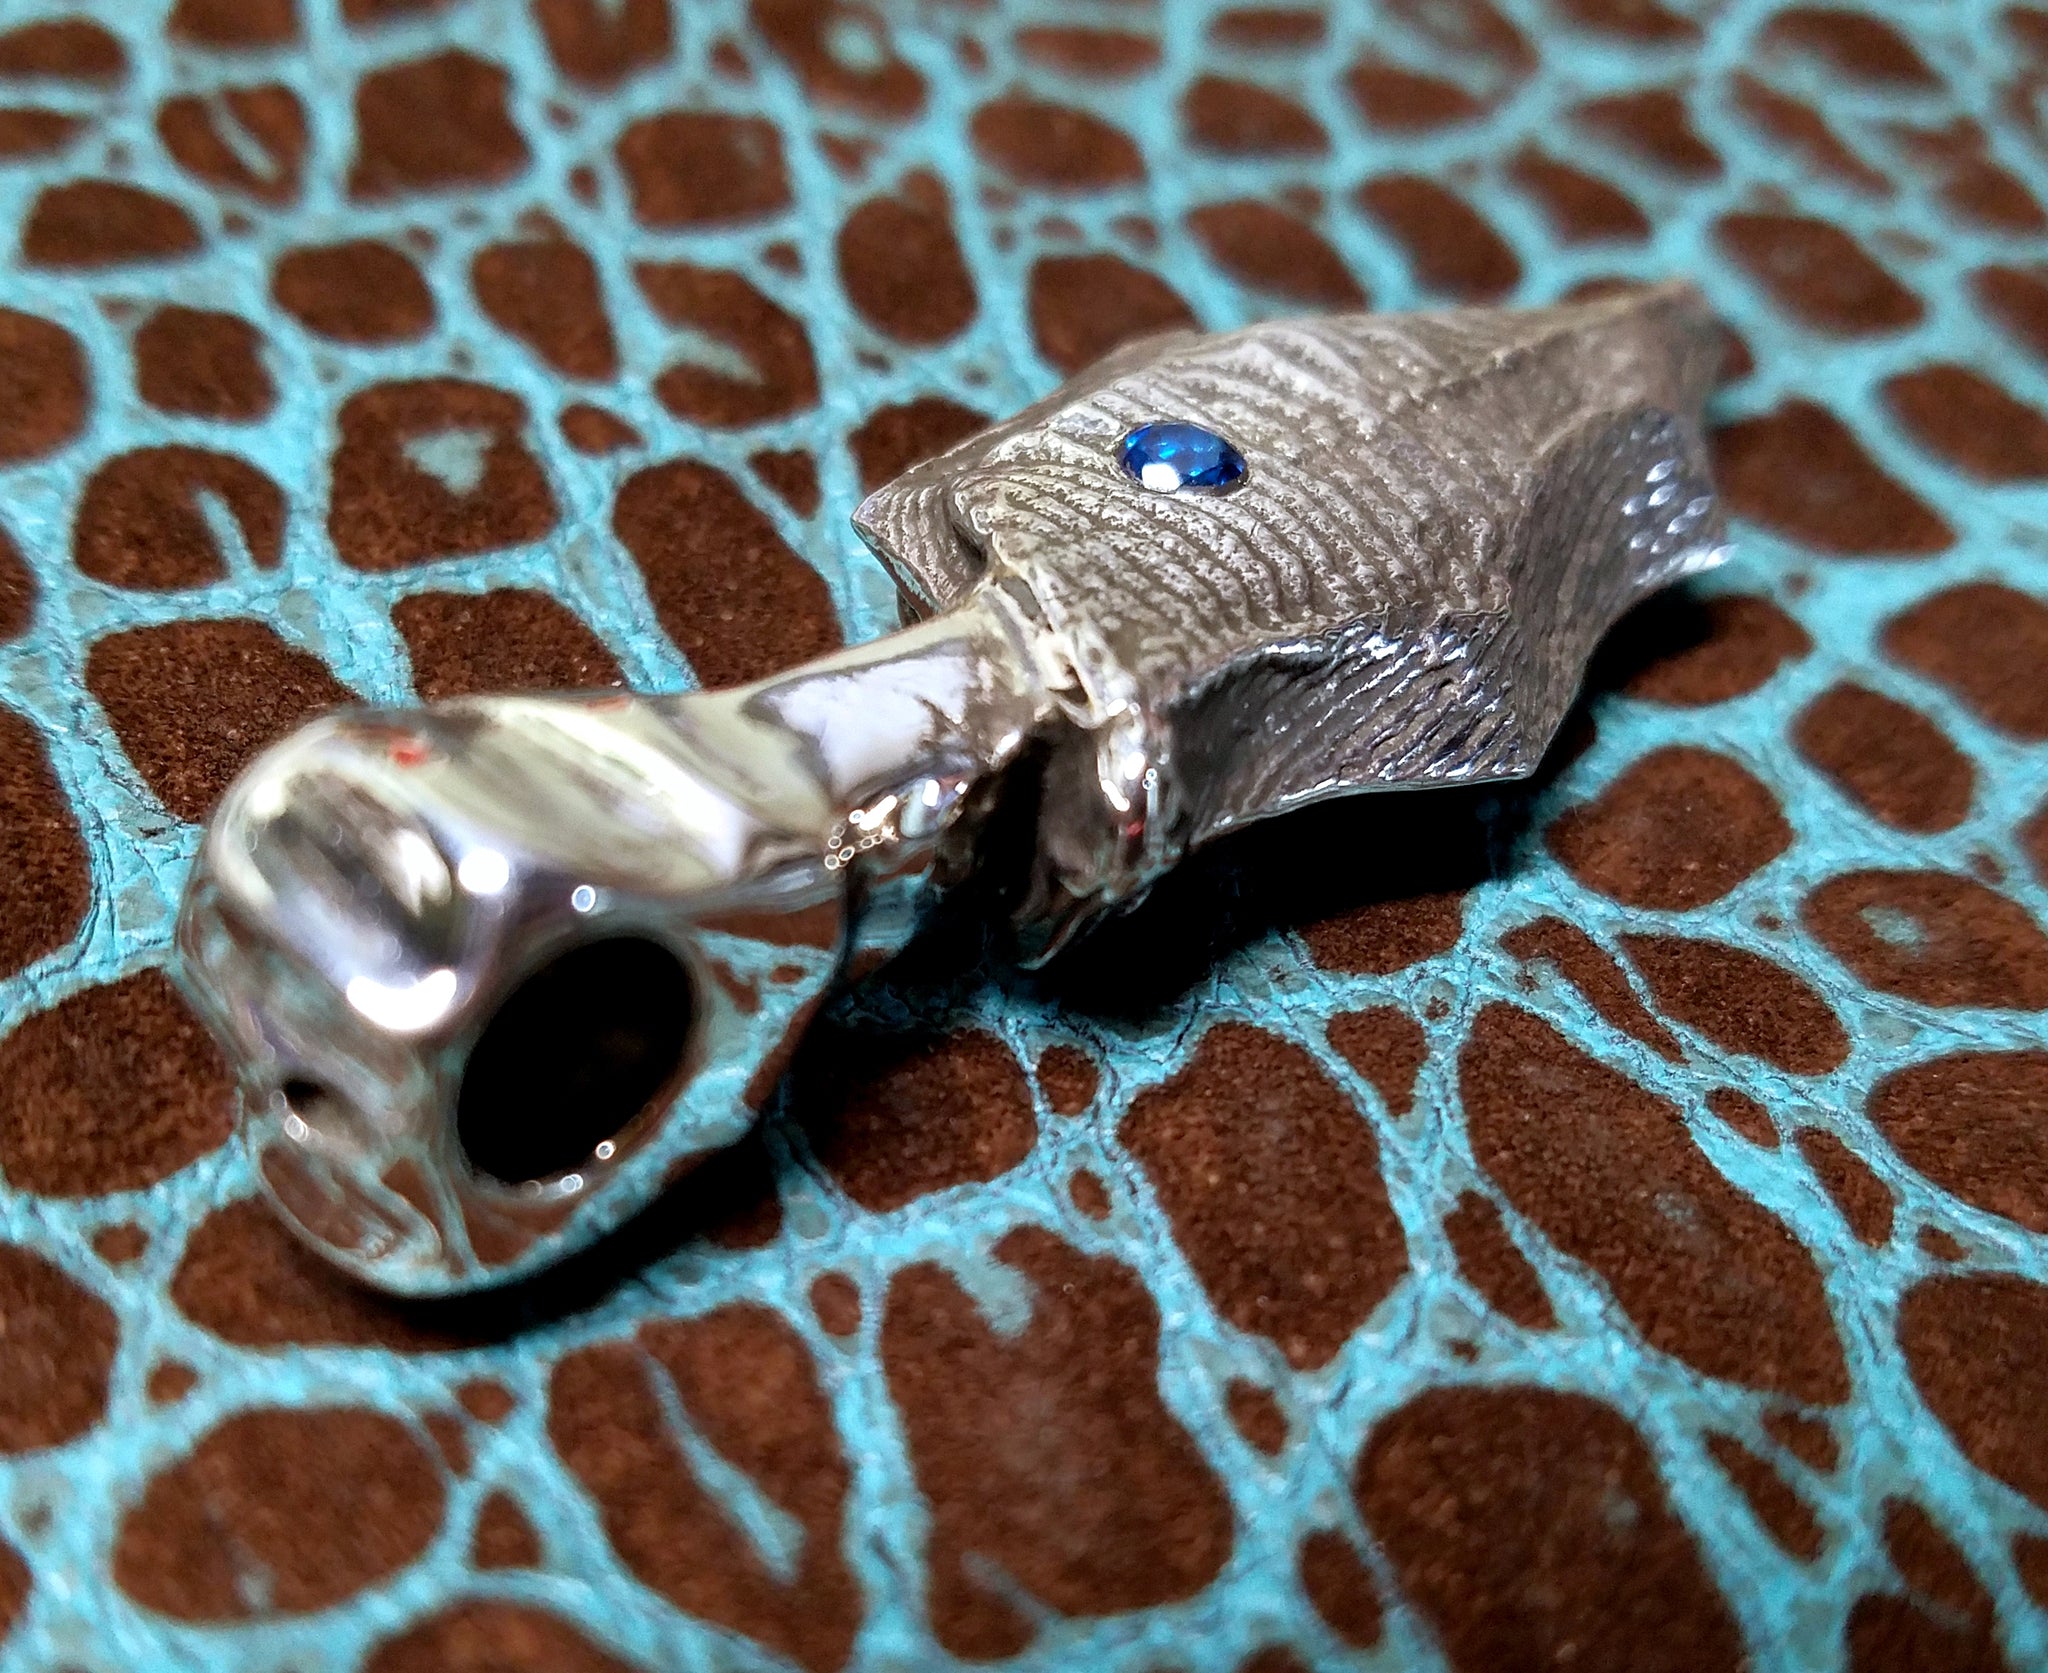 'Alien Seed' Hand-carved Hand-poured Cuttlefish Pendant #2 by Phantom